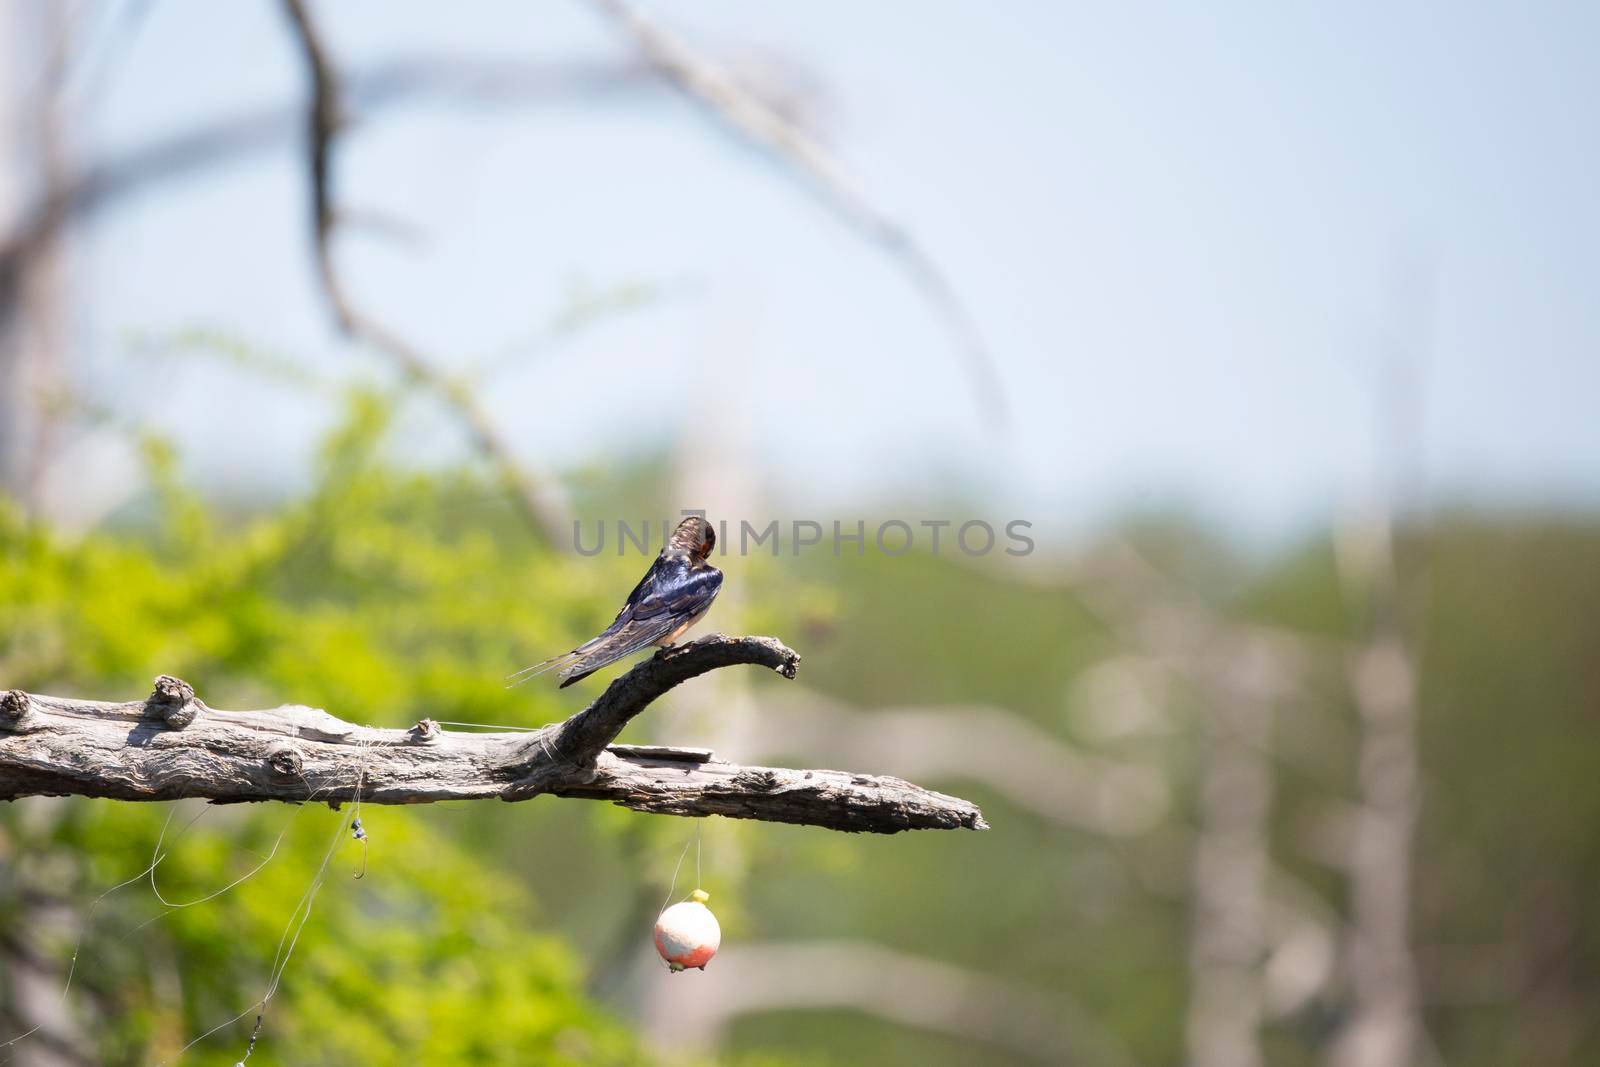 Barn swallow (Hirundo rustica) grooming from a branch on a cypress tree above a fishing bobber